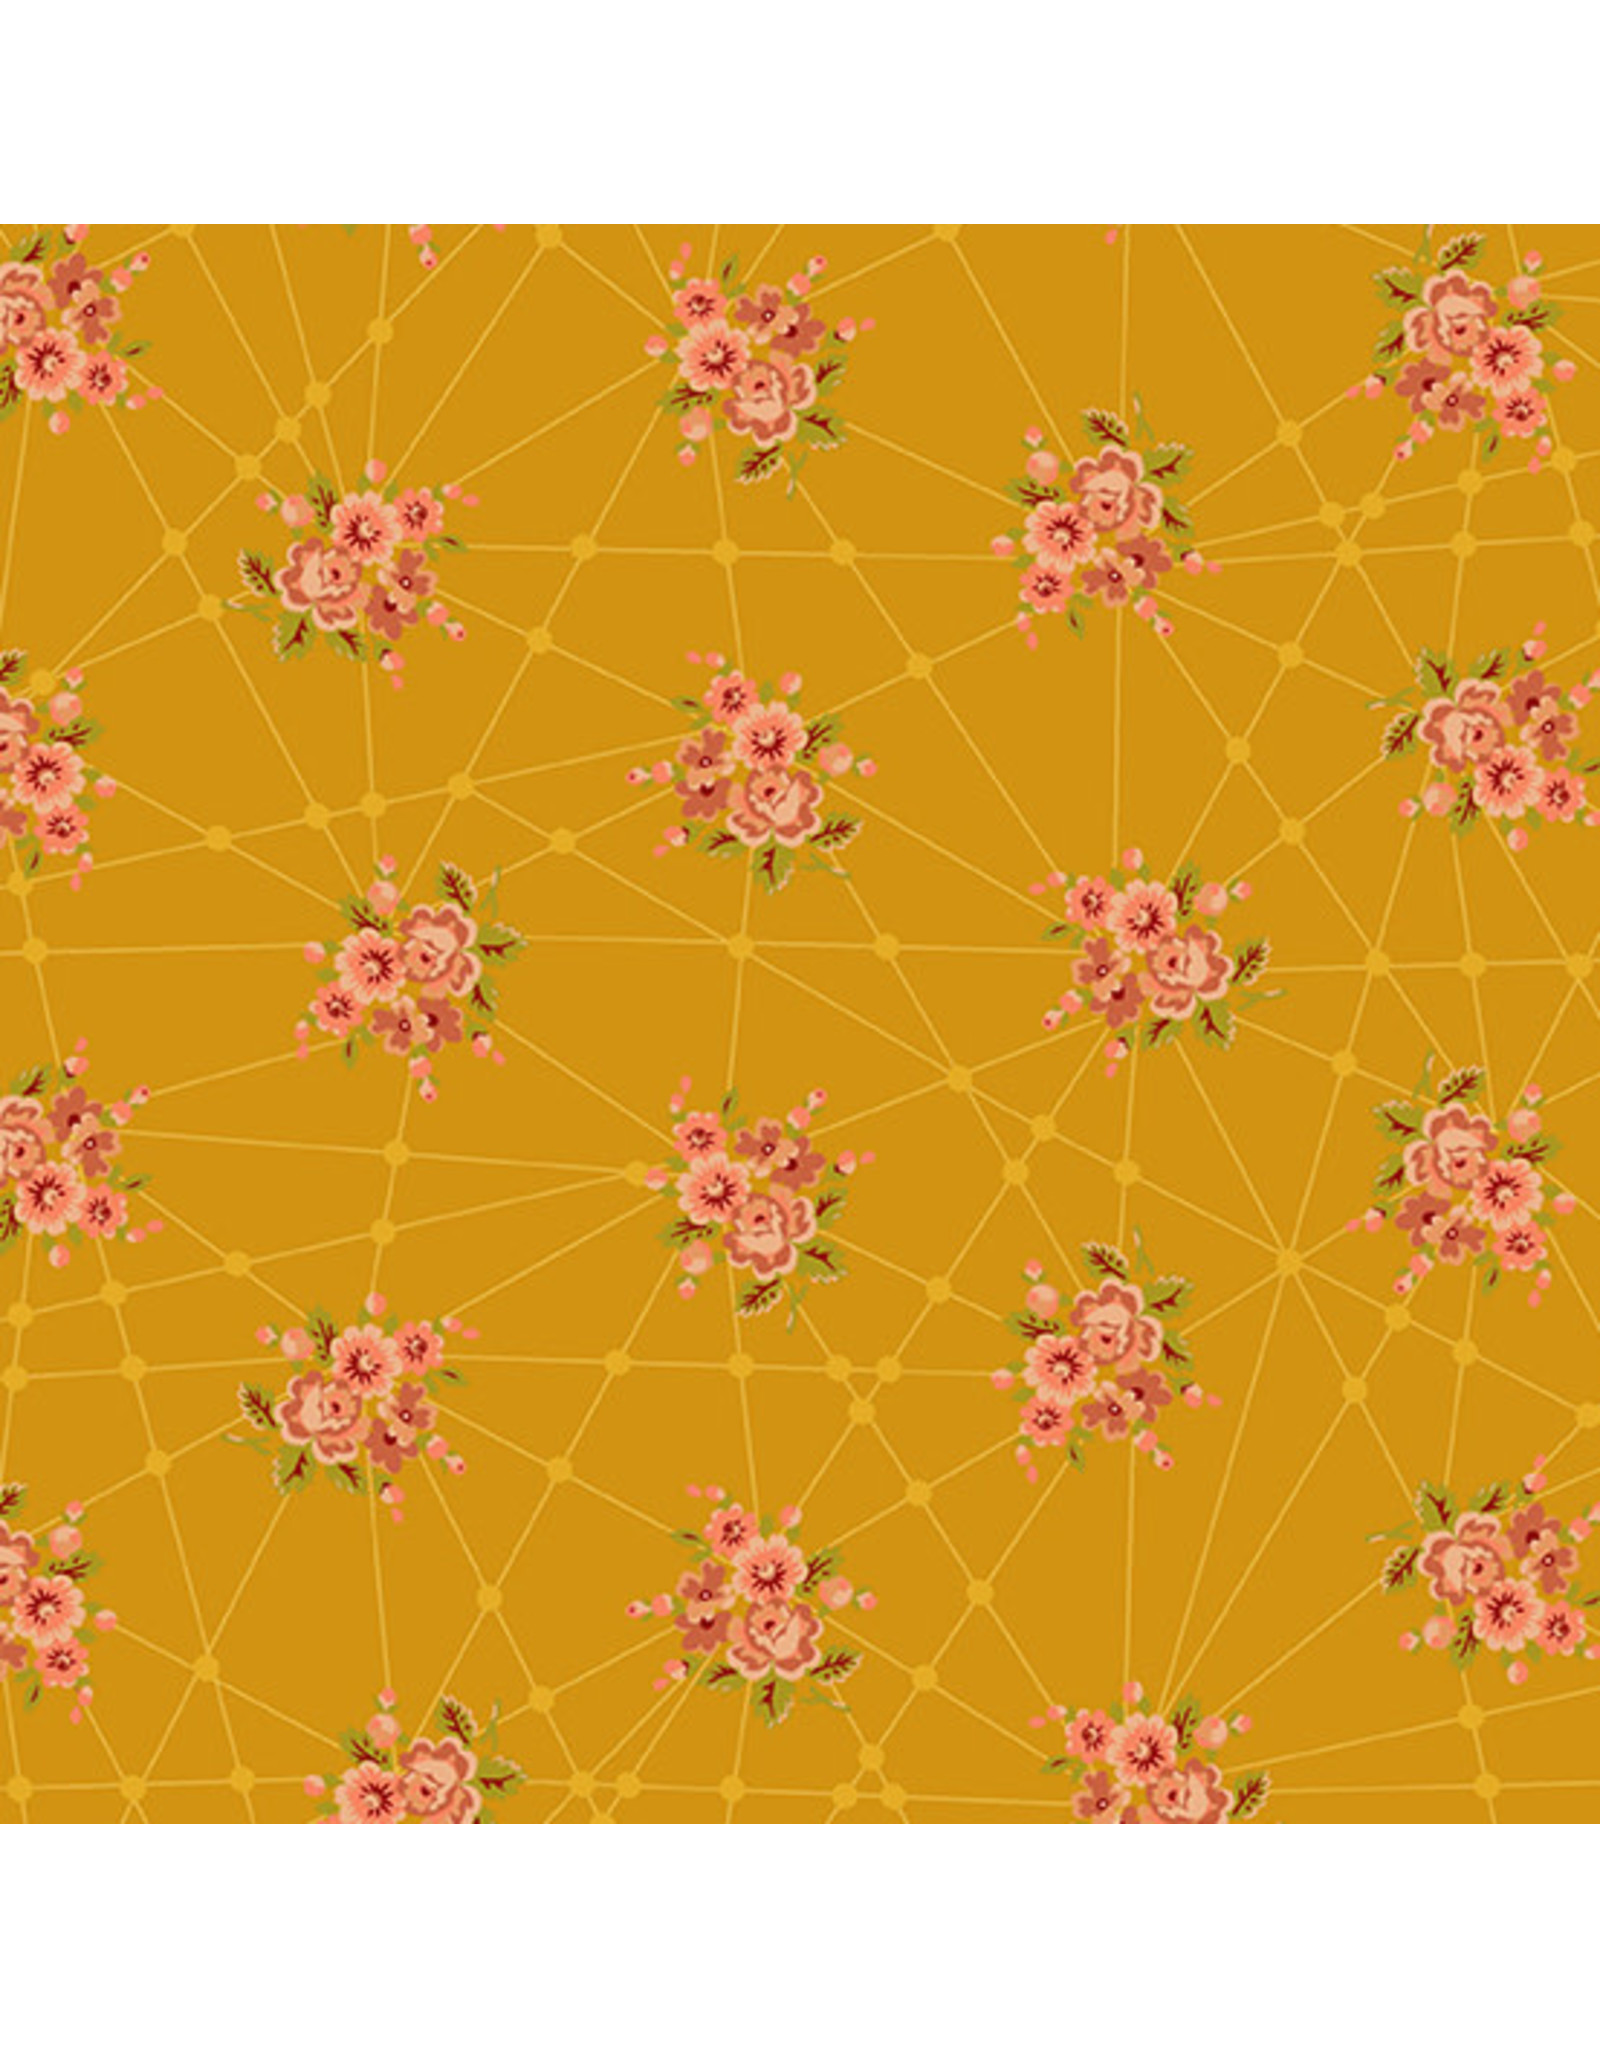 Giucy Giuce Nonna, Little Bouquets in Garfield Gold, Fabric Half-Yards